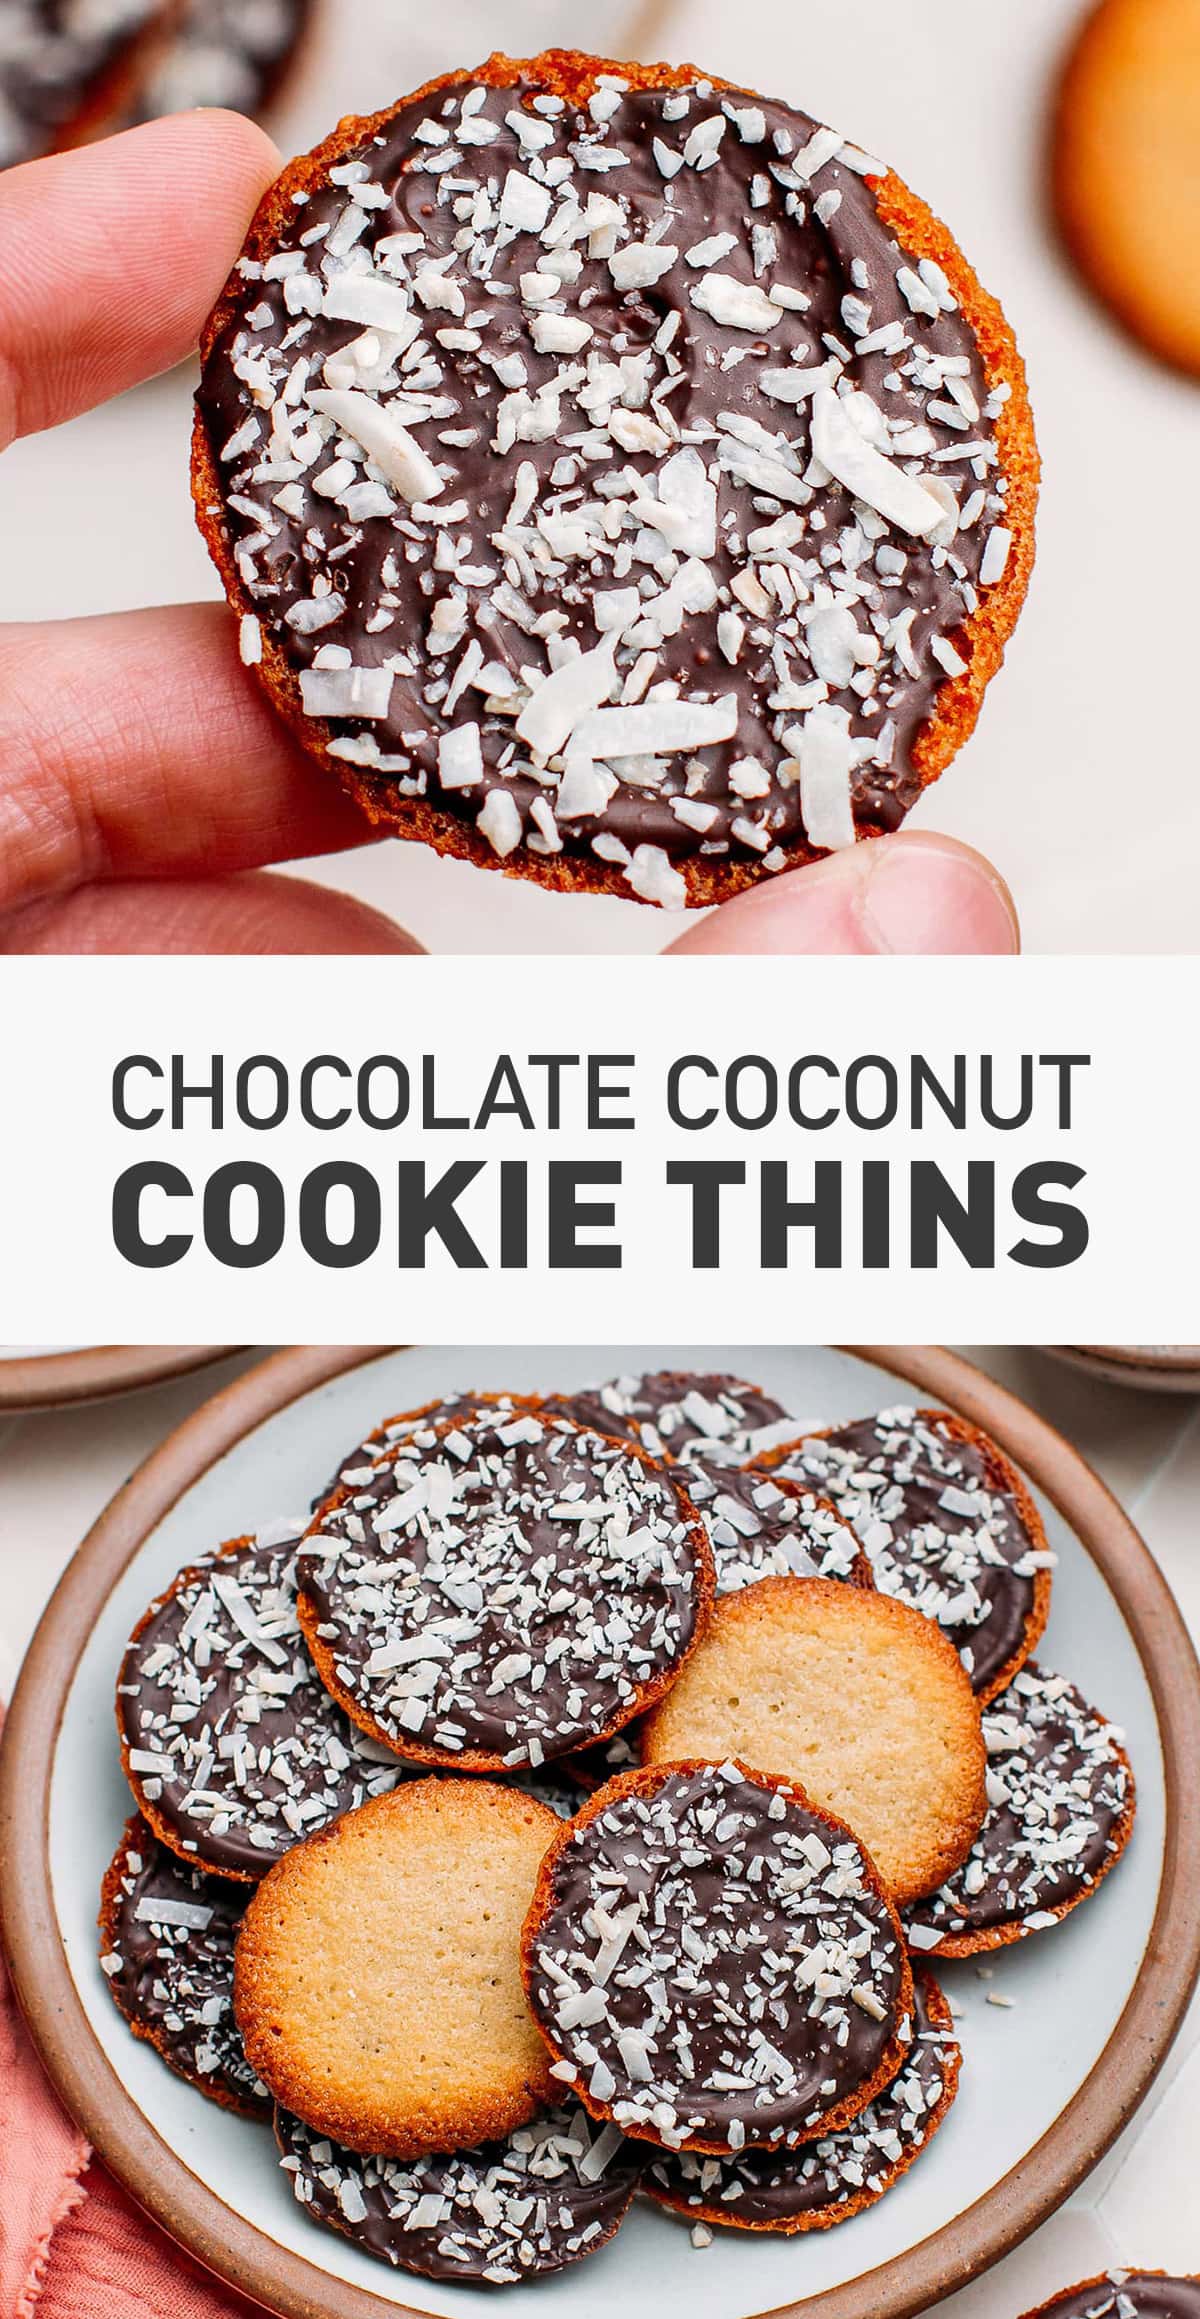 These crispy and delicate chocolate coconut cookie thins are coated with a thin layer of dark chocolate and sprinkled with shredded coconut. Made with only 8 ingredients, these vegan thin cookies are an absolute delight. Enjoy them with a cup of tea or coffee, or gift them during the holiday season! #veganbaking #cookies #cookiethins